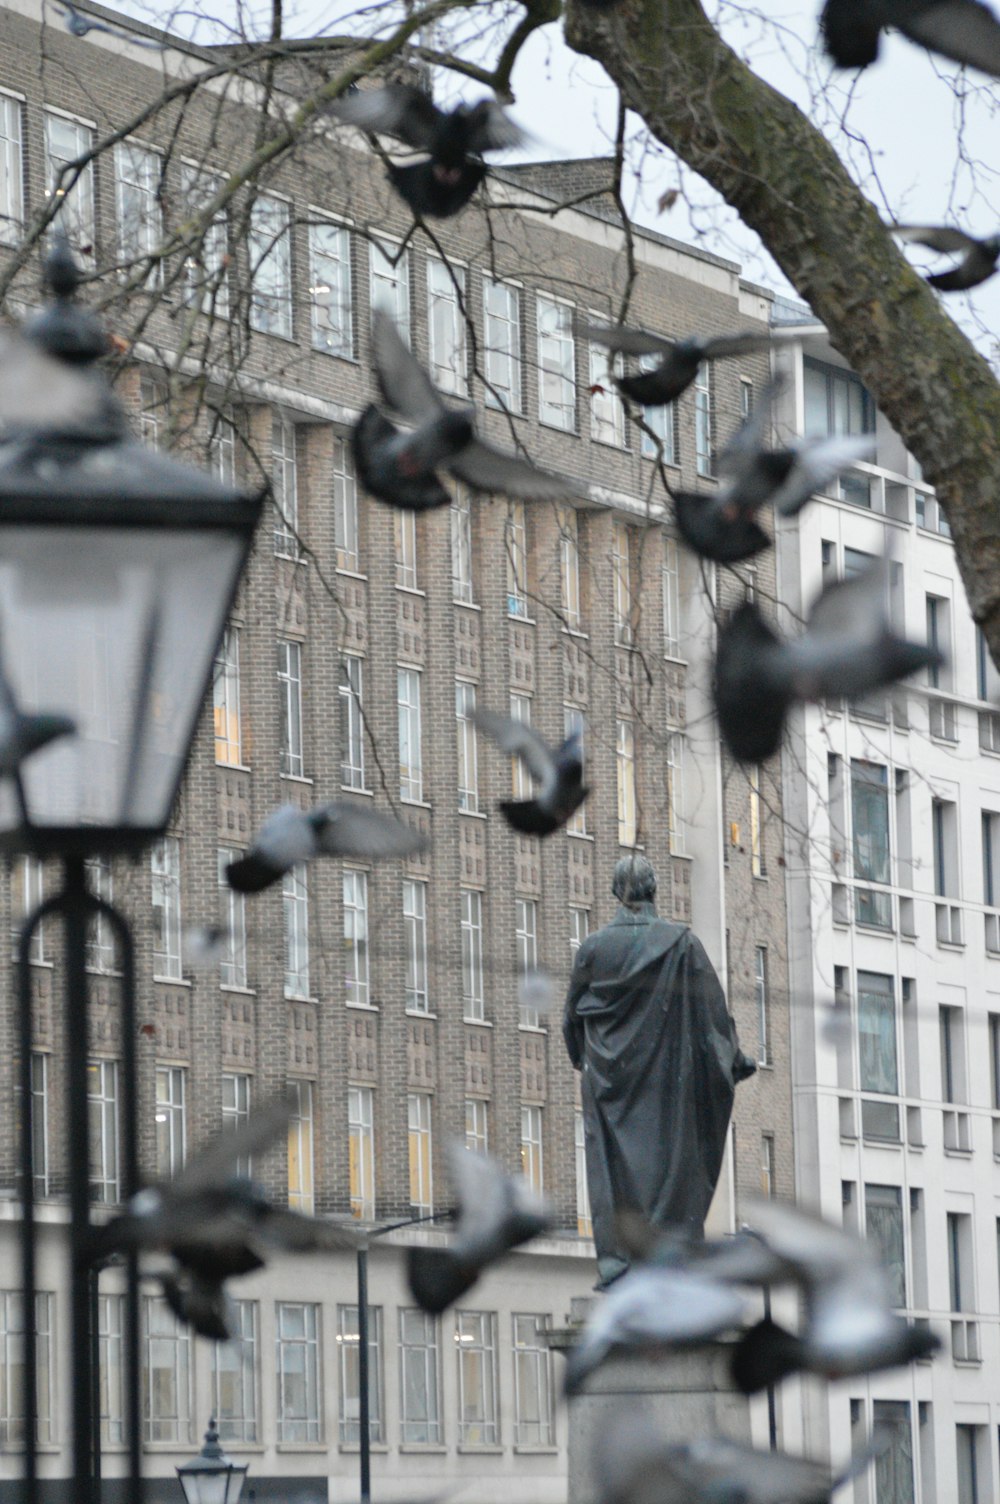 a statue of a man surrounded by birds in front of a building